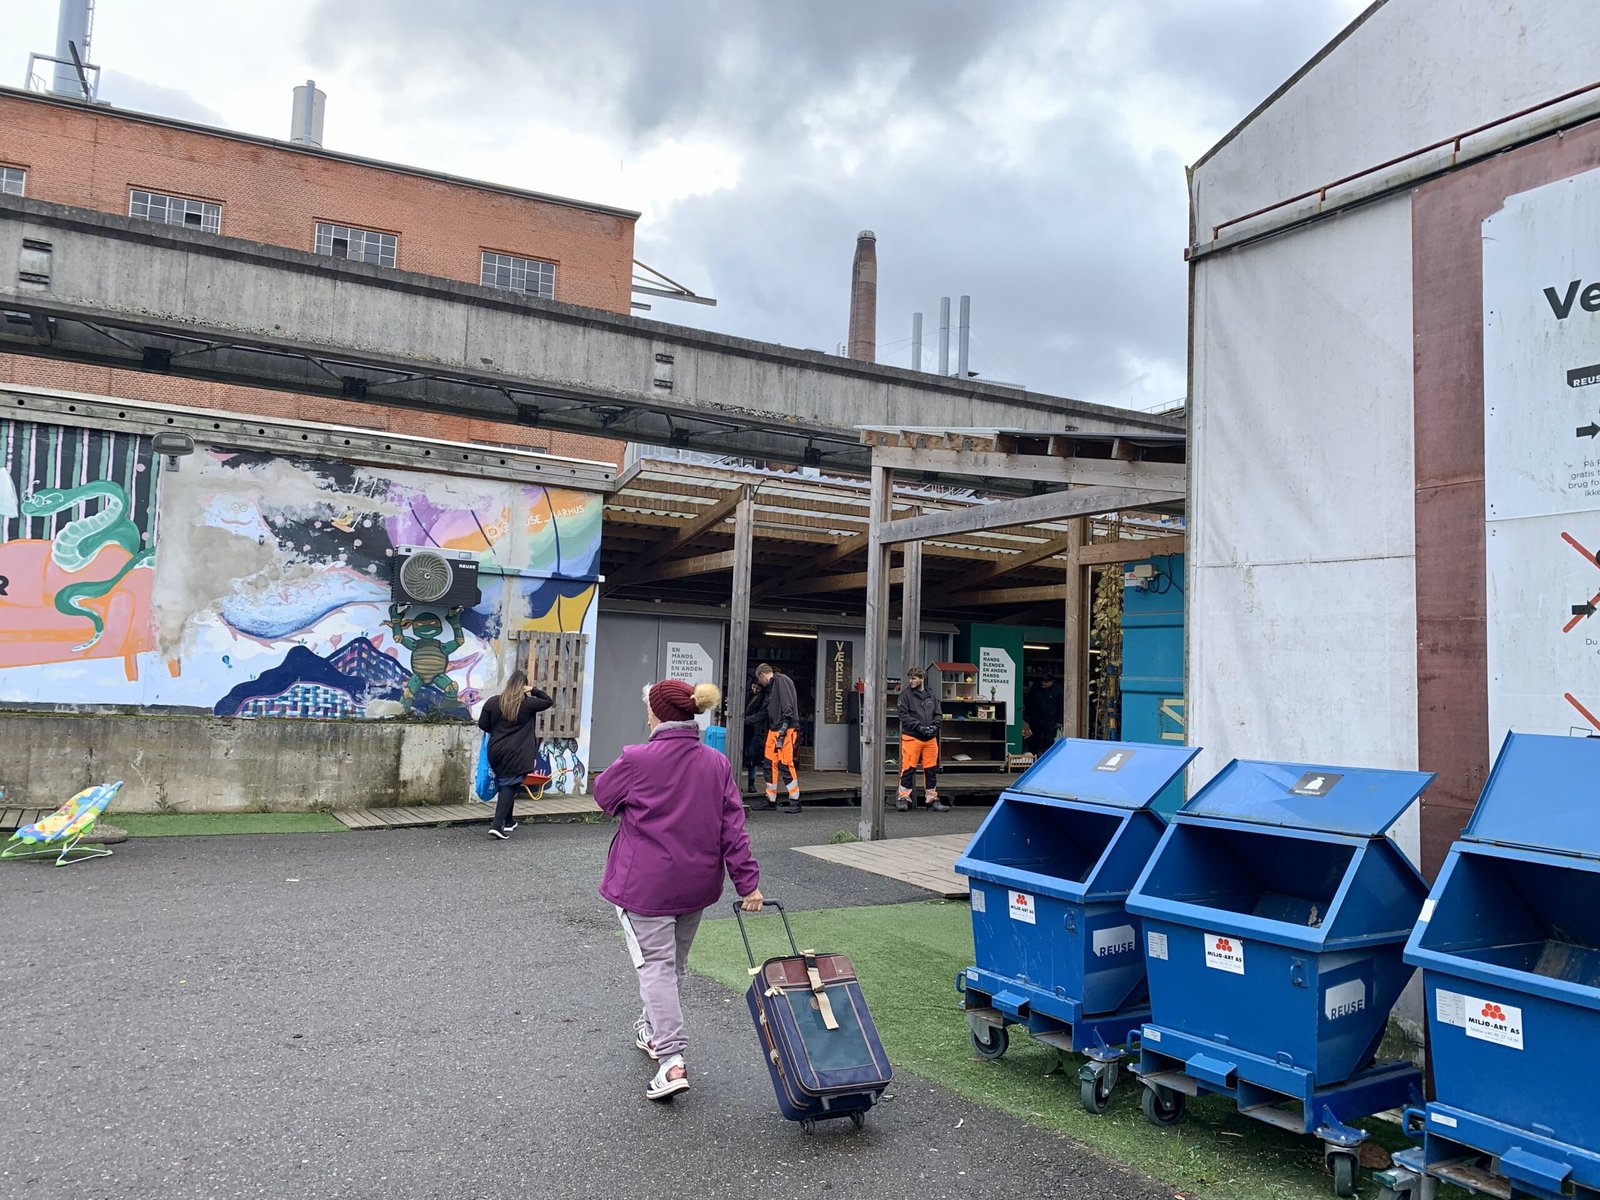 An elderly woman carries a suitcase at the circular economy center Reuse, in Aarhus, Denmark.